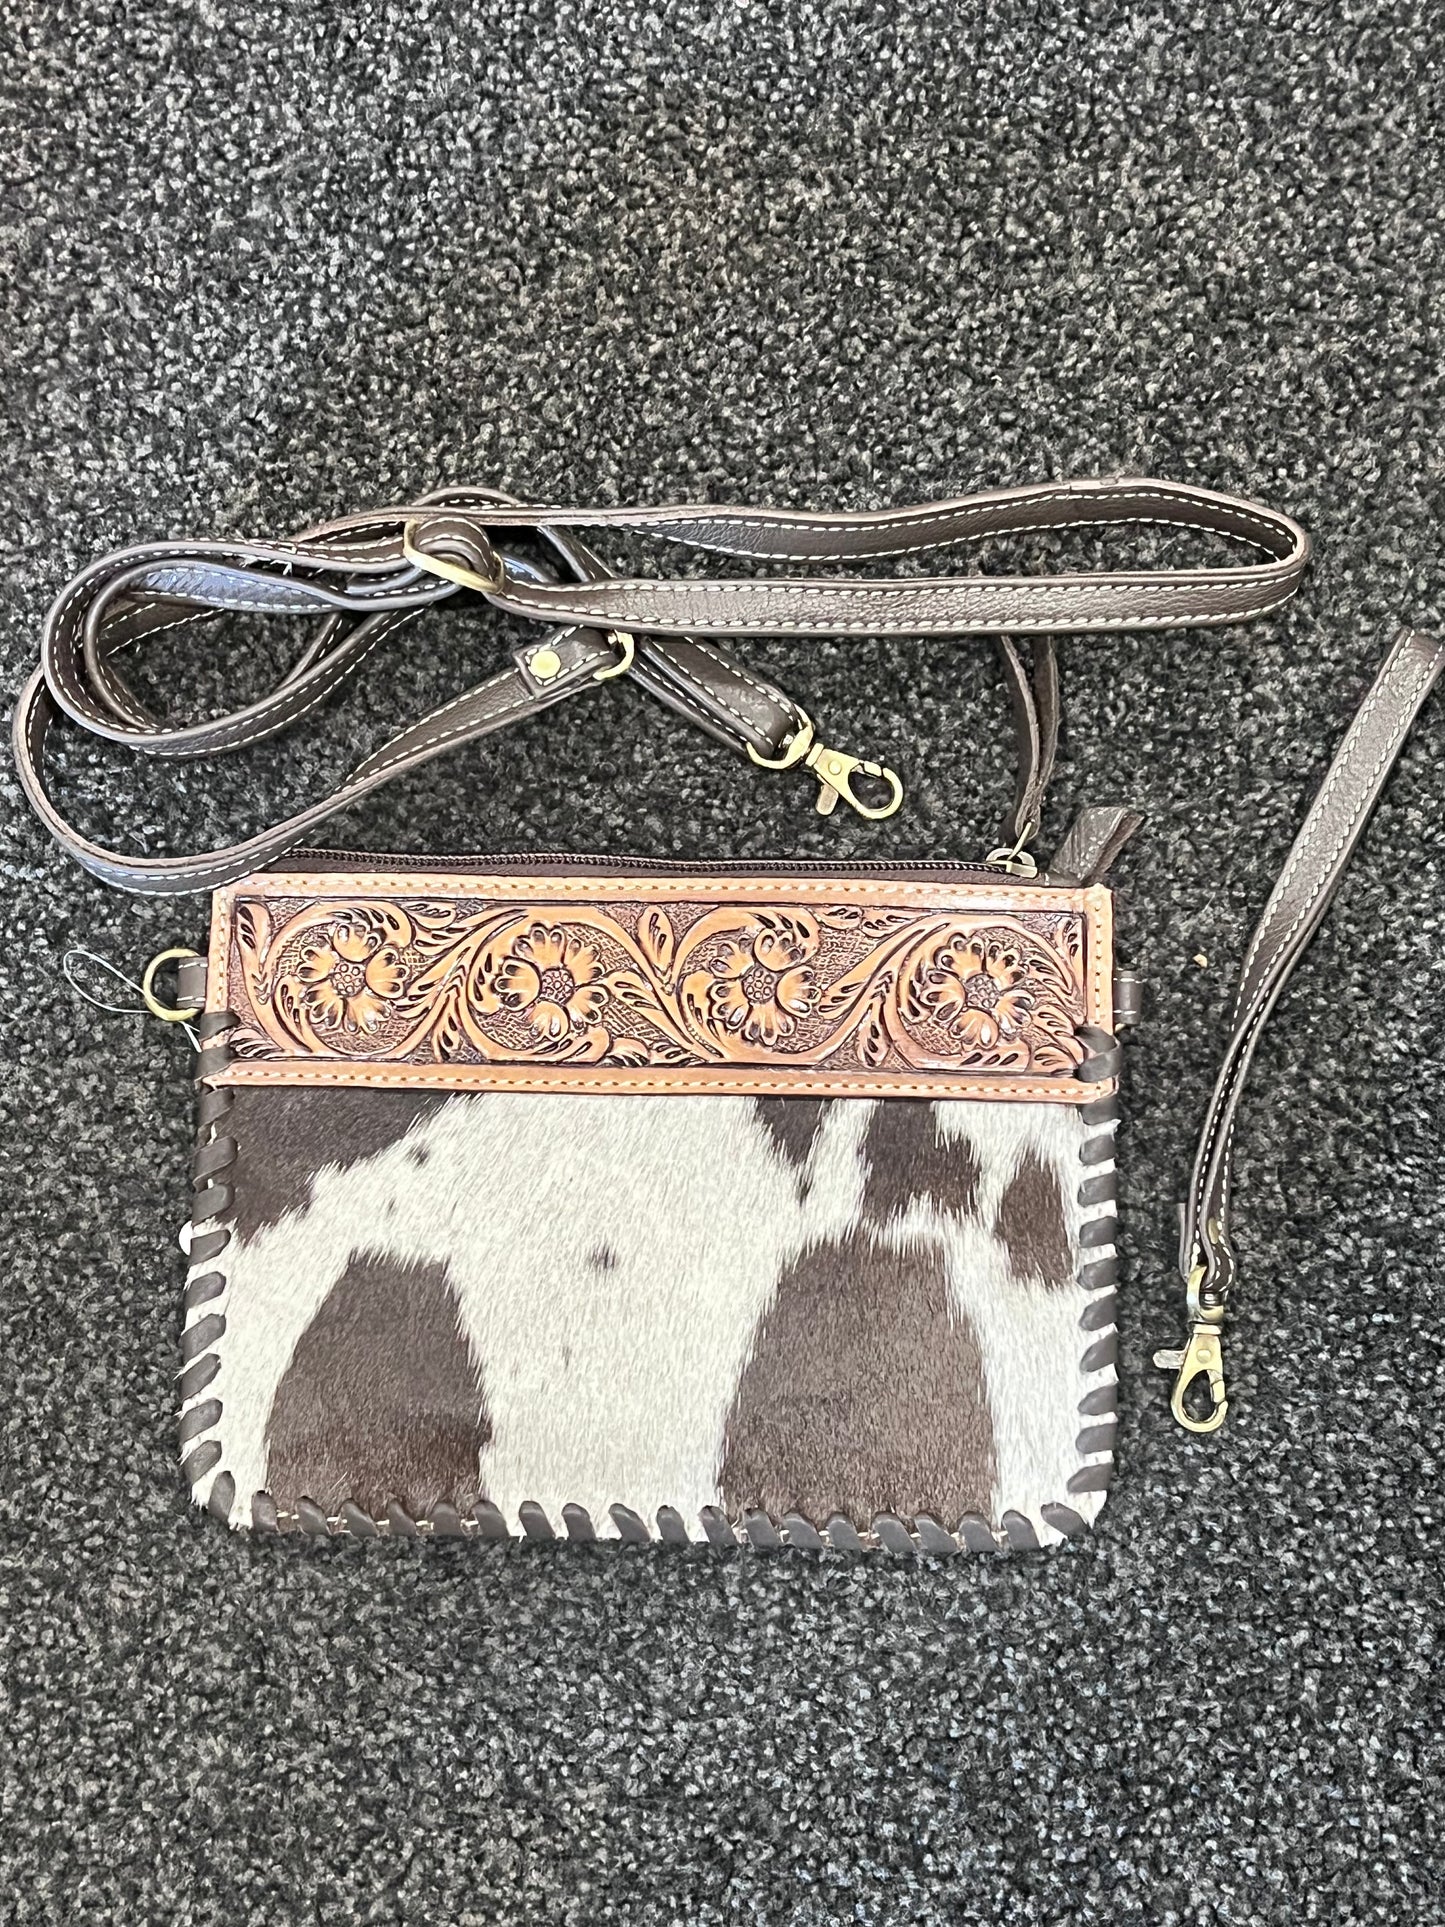 Tooling Leather Cowhide Small Clutch Bag